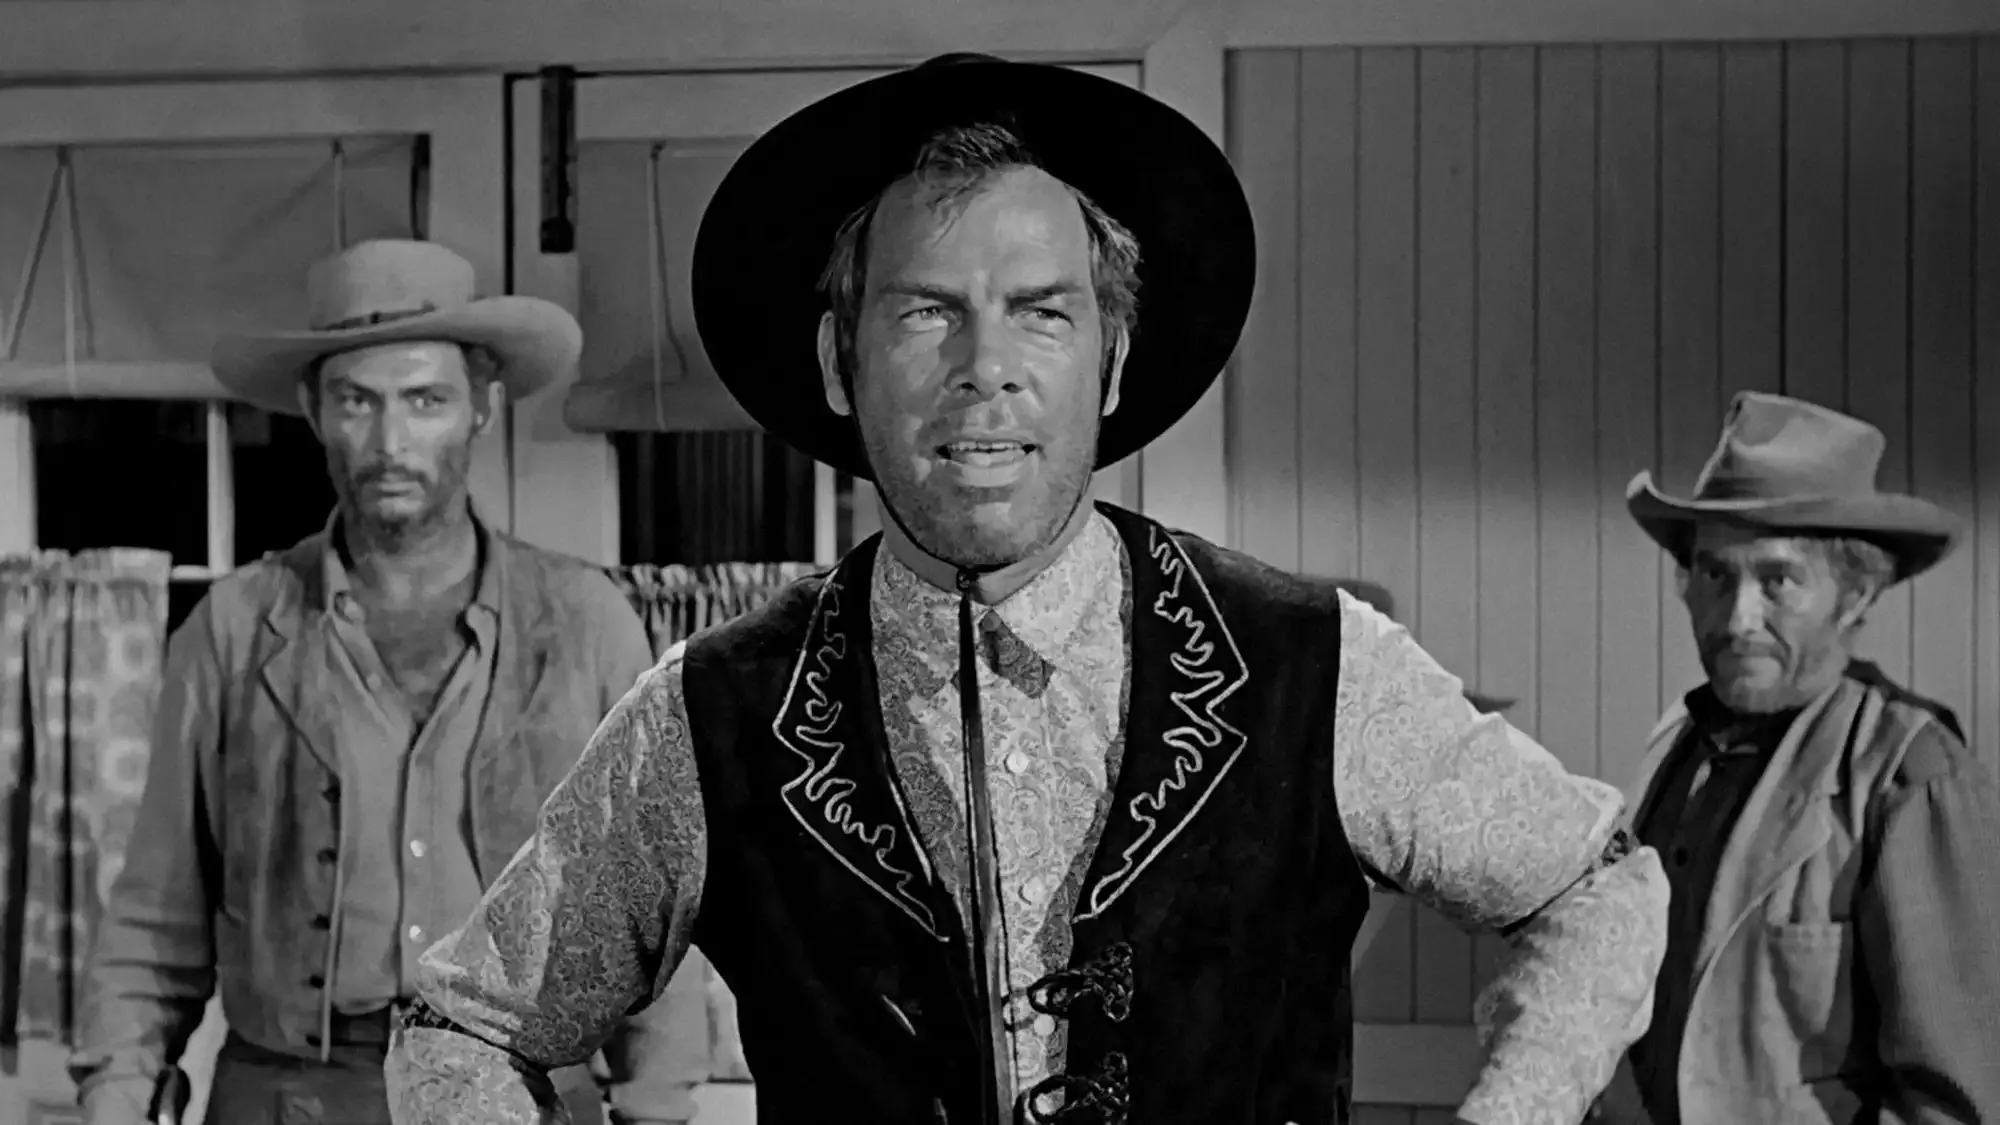 The Man Who Shot Liberty Valance movie review